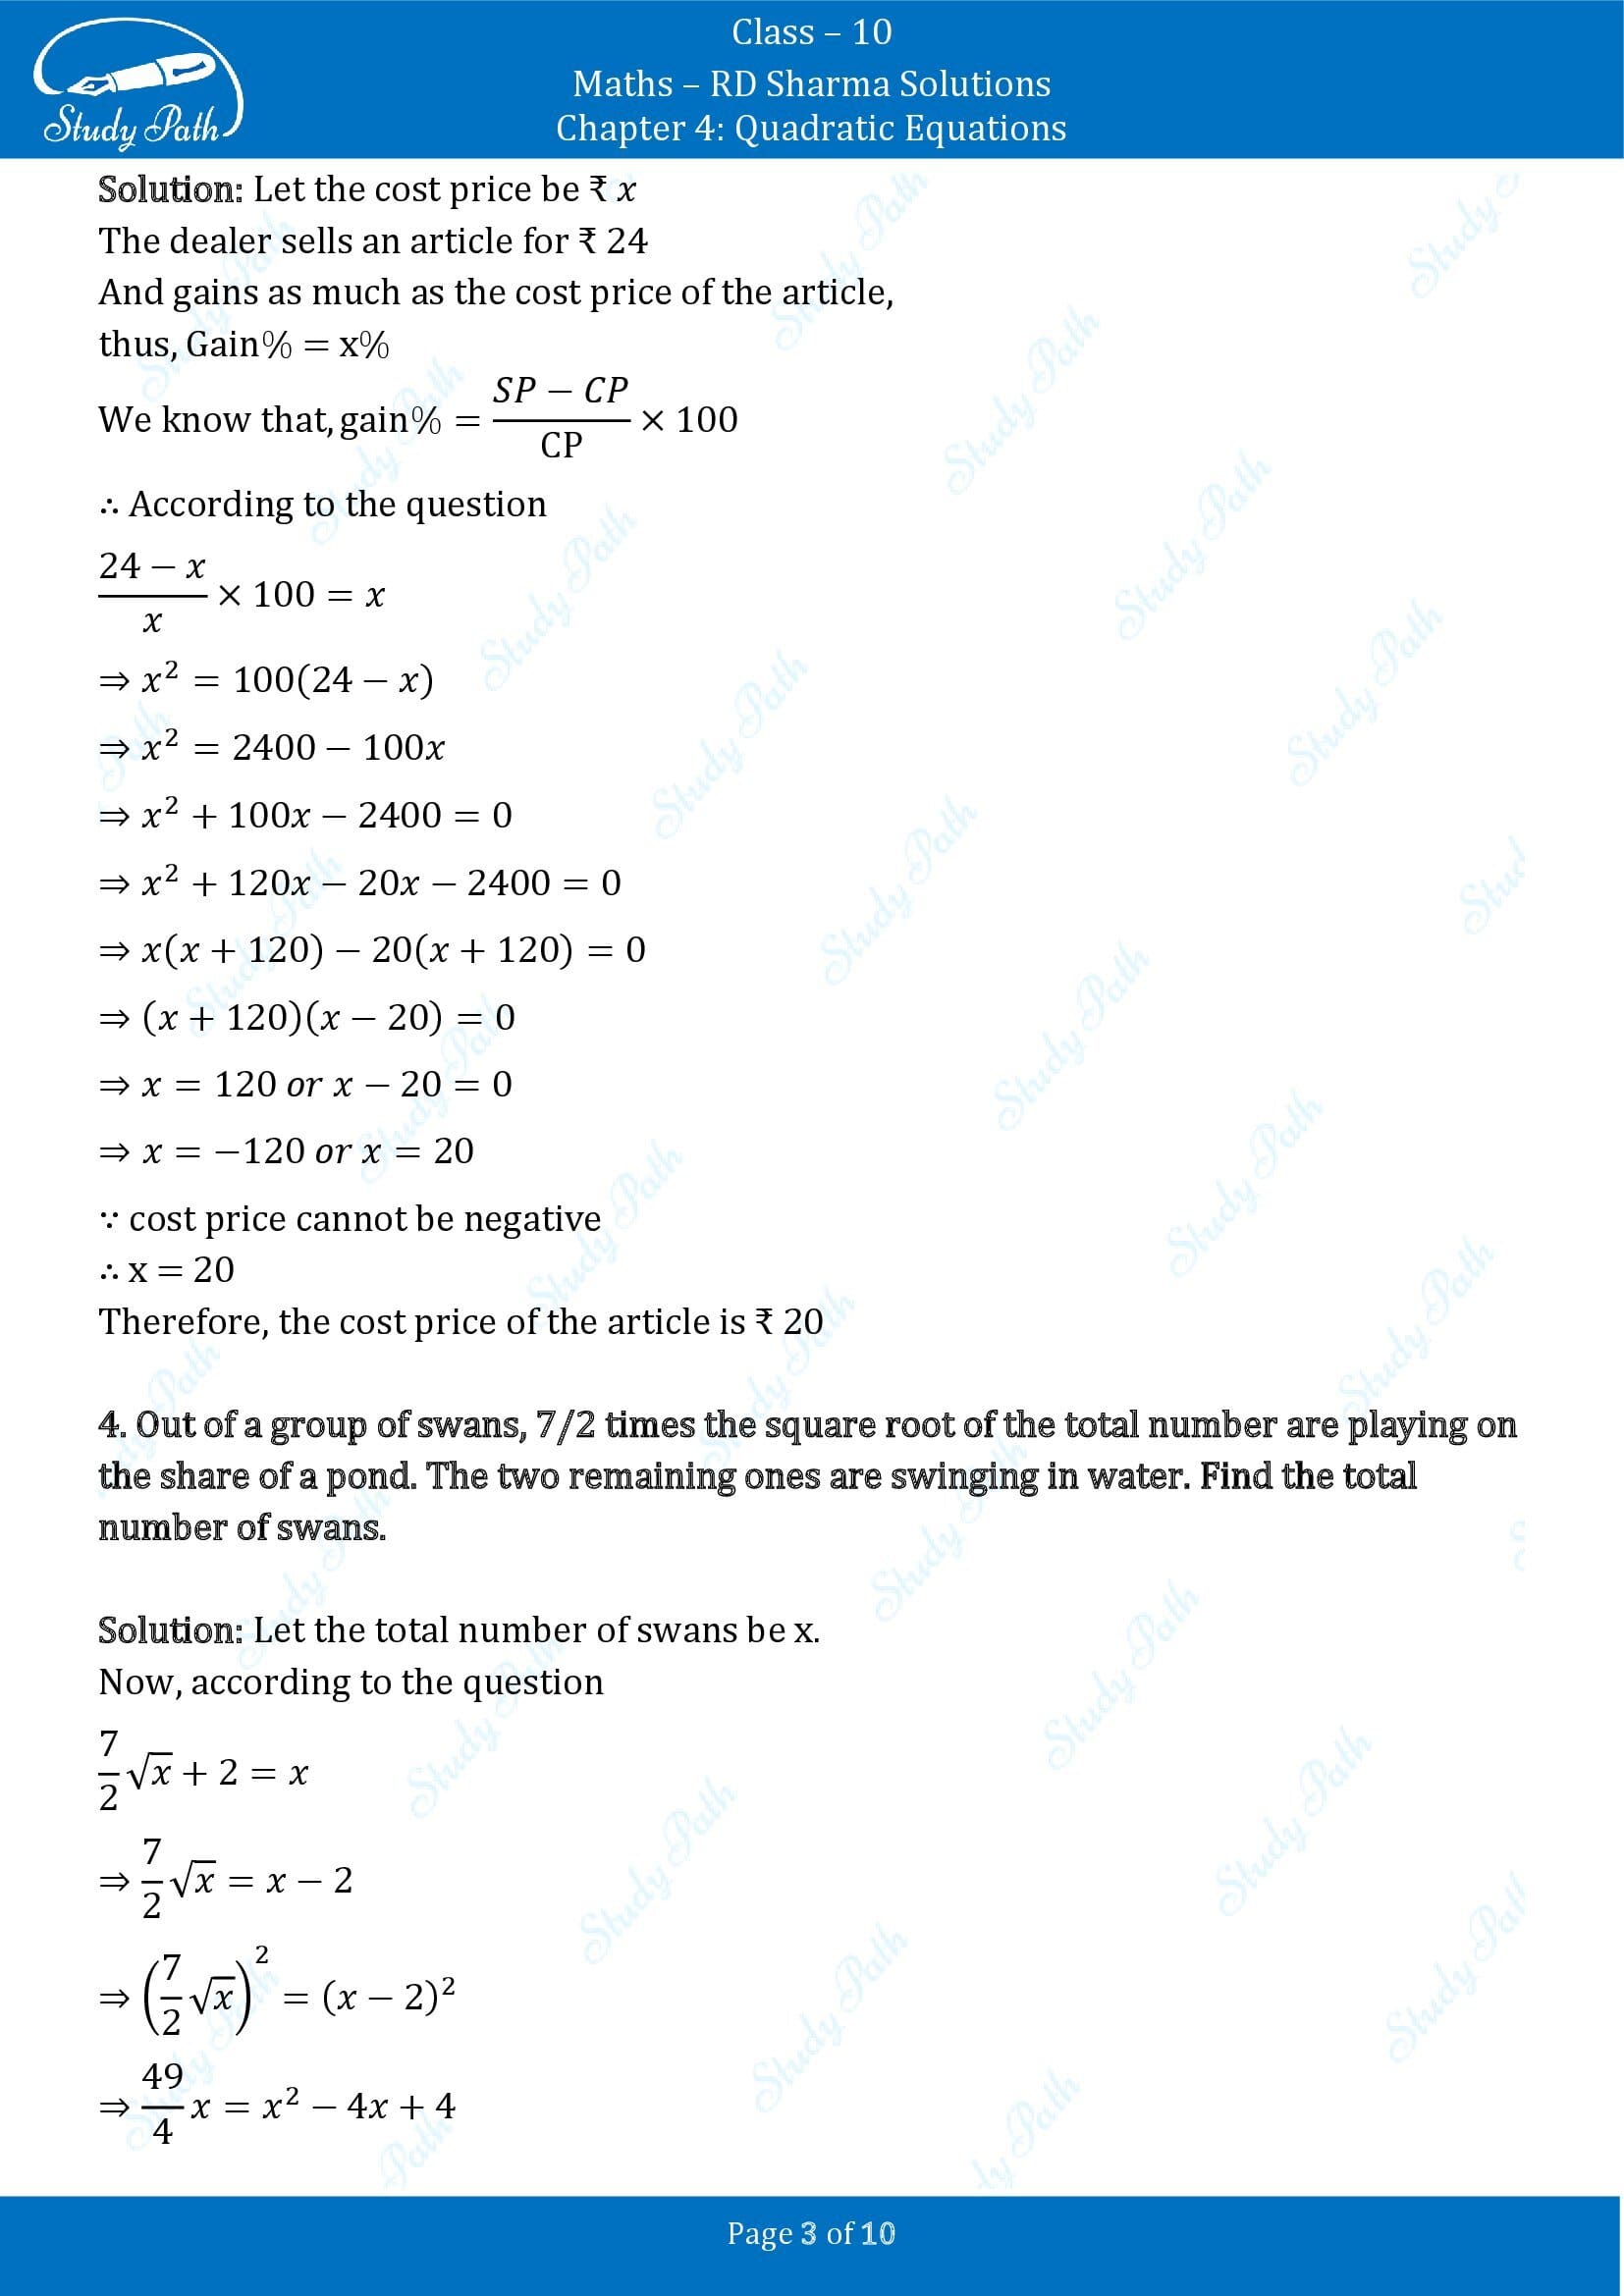 RD Sharma Solutions Class 10 Chapter 4 Quadratic Equations Exercise 4.13 00003